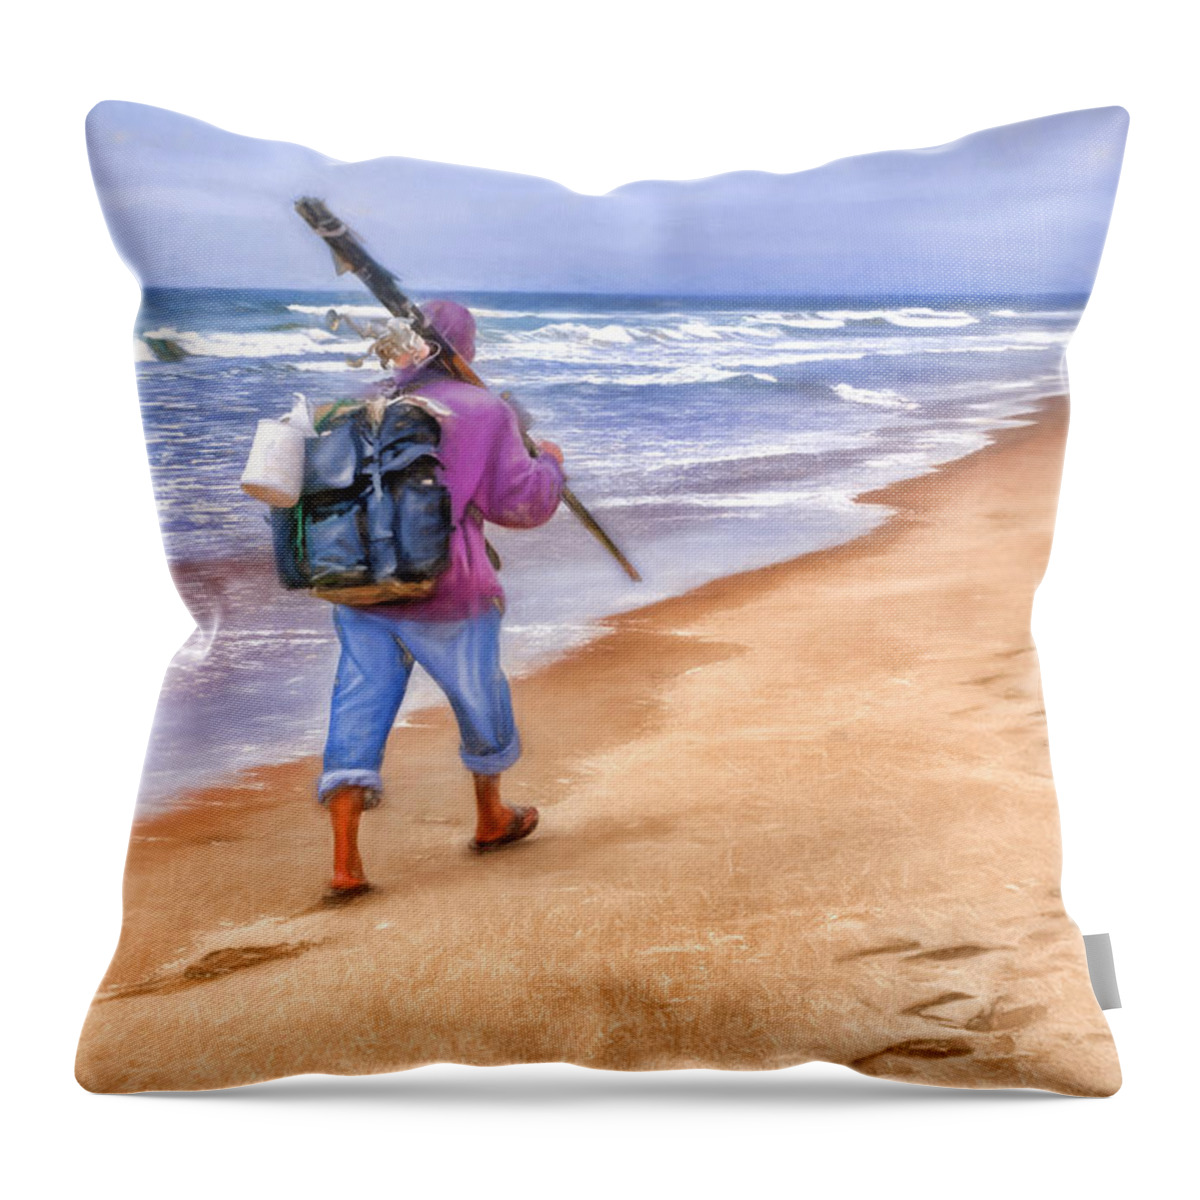 Fisherman Throw Pillow featuring the photograph Heading Home - Ocean Fisherman by Nikolyn McDonald